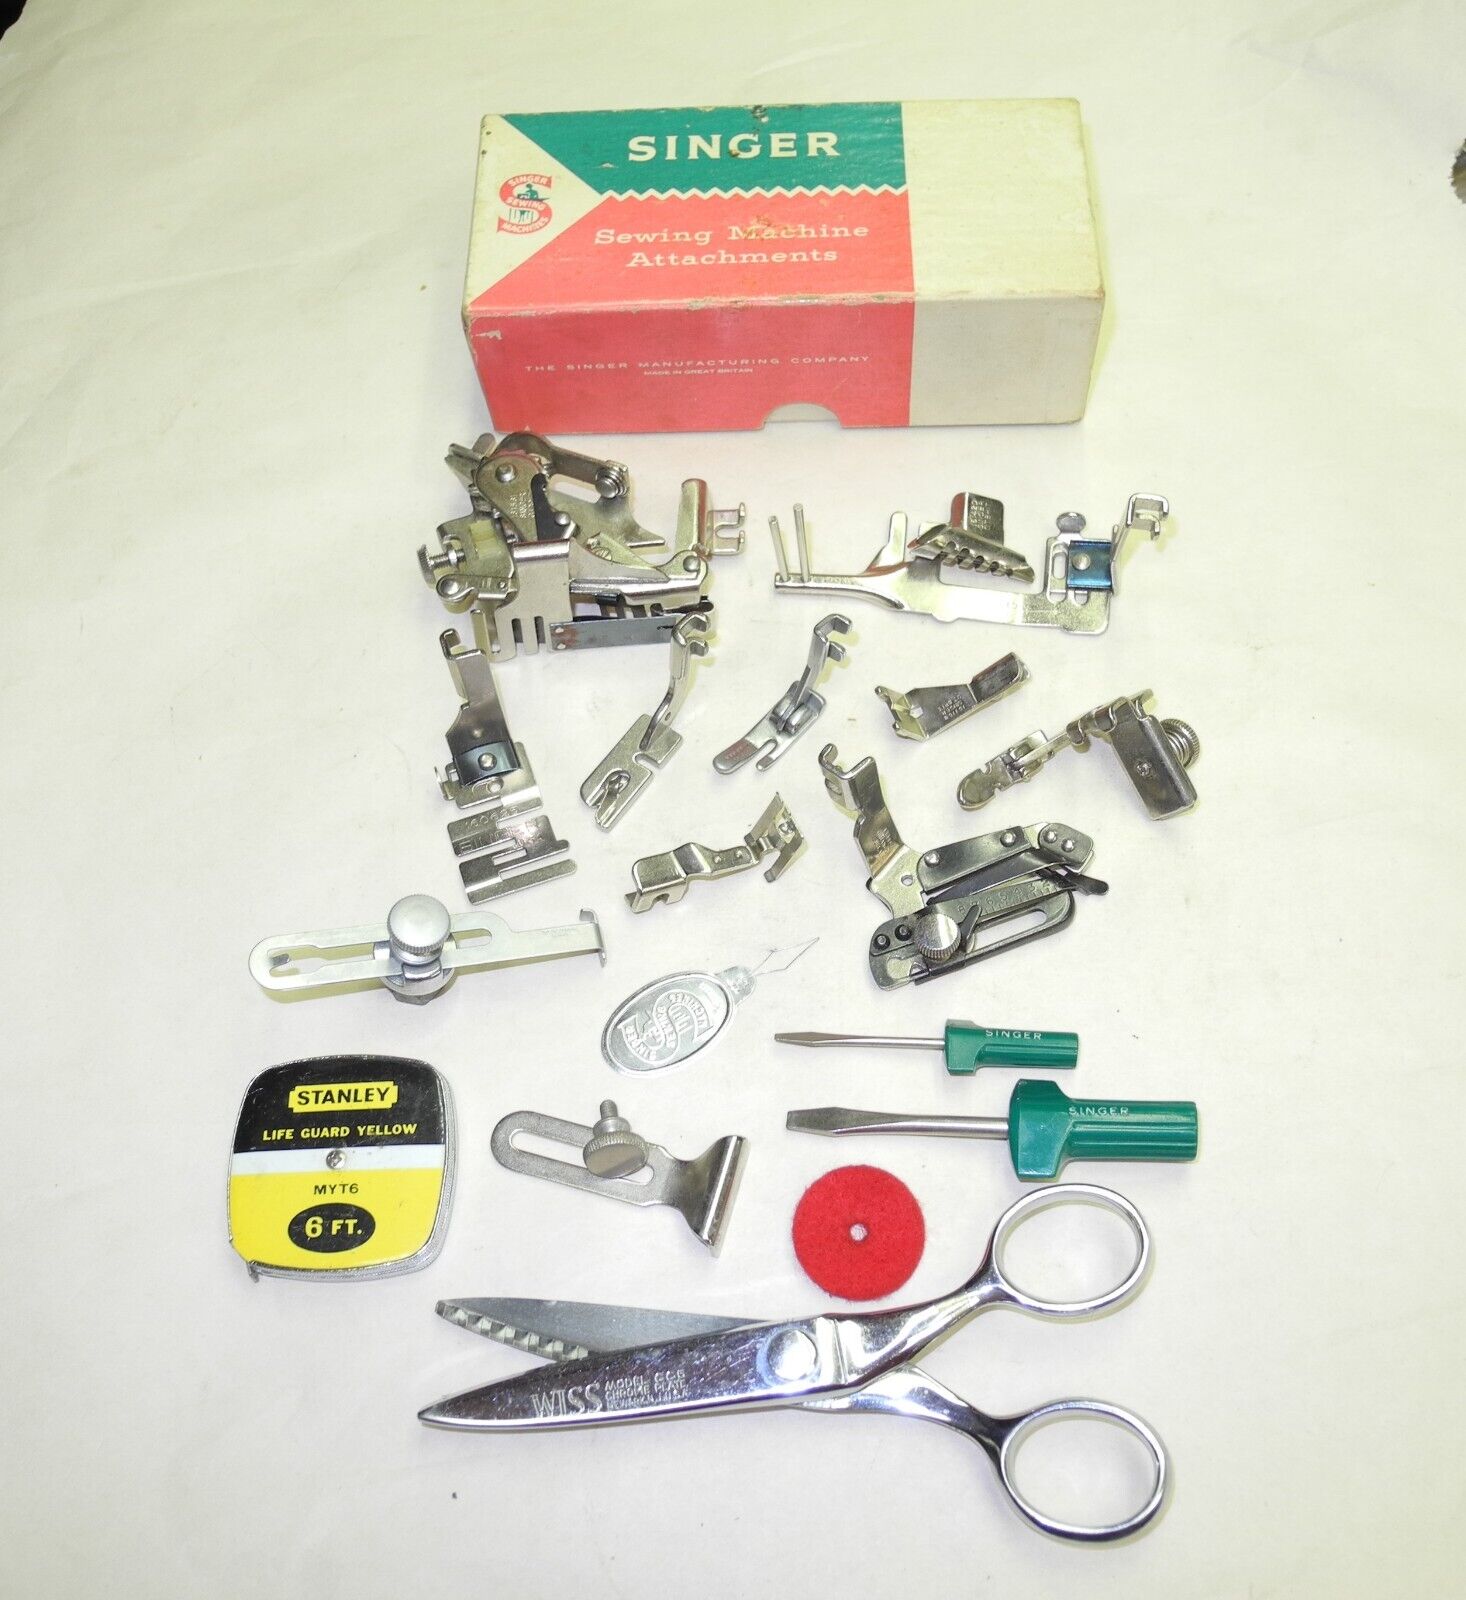 VINTAGE SINGER SLANT HEAD SEWING MACHINE ACCESSORY KIT,  NICE CONDITION, CLEAN